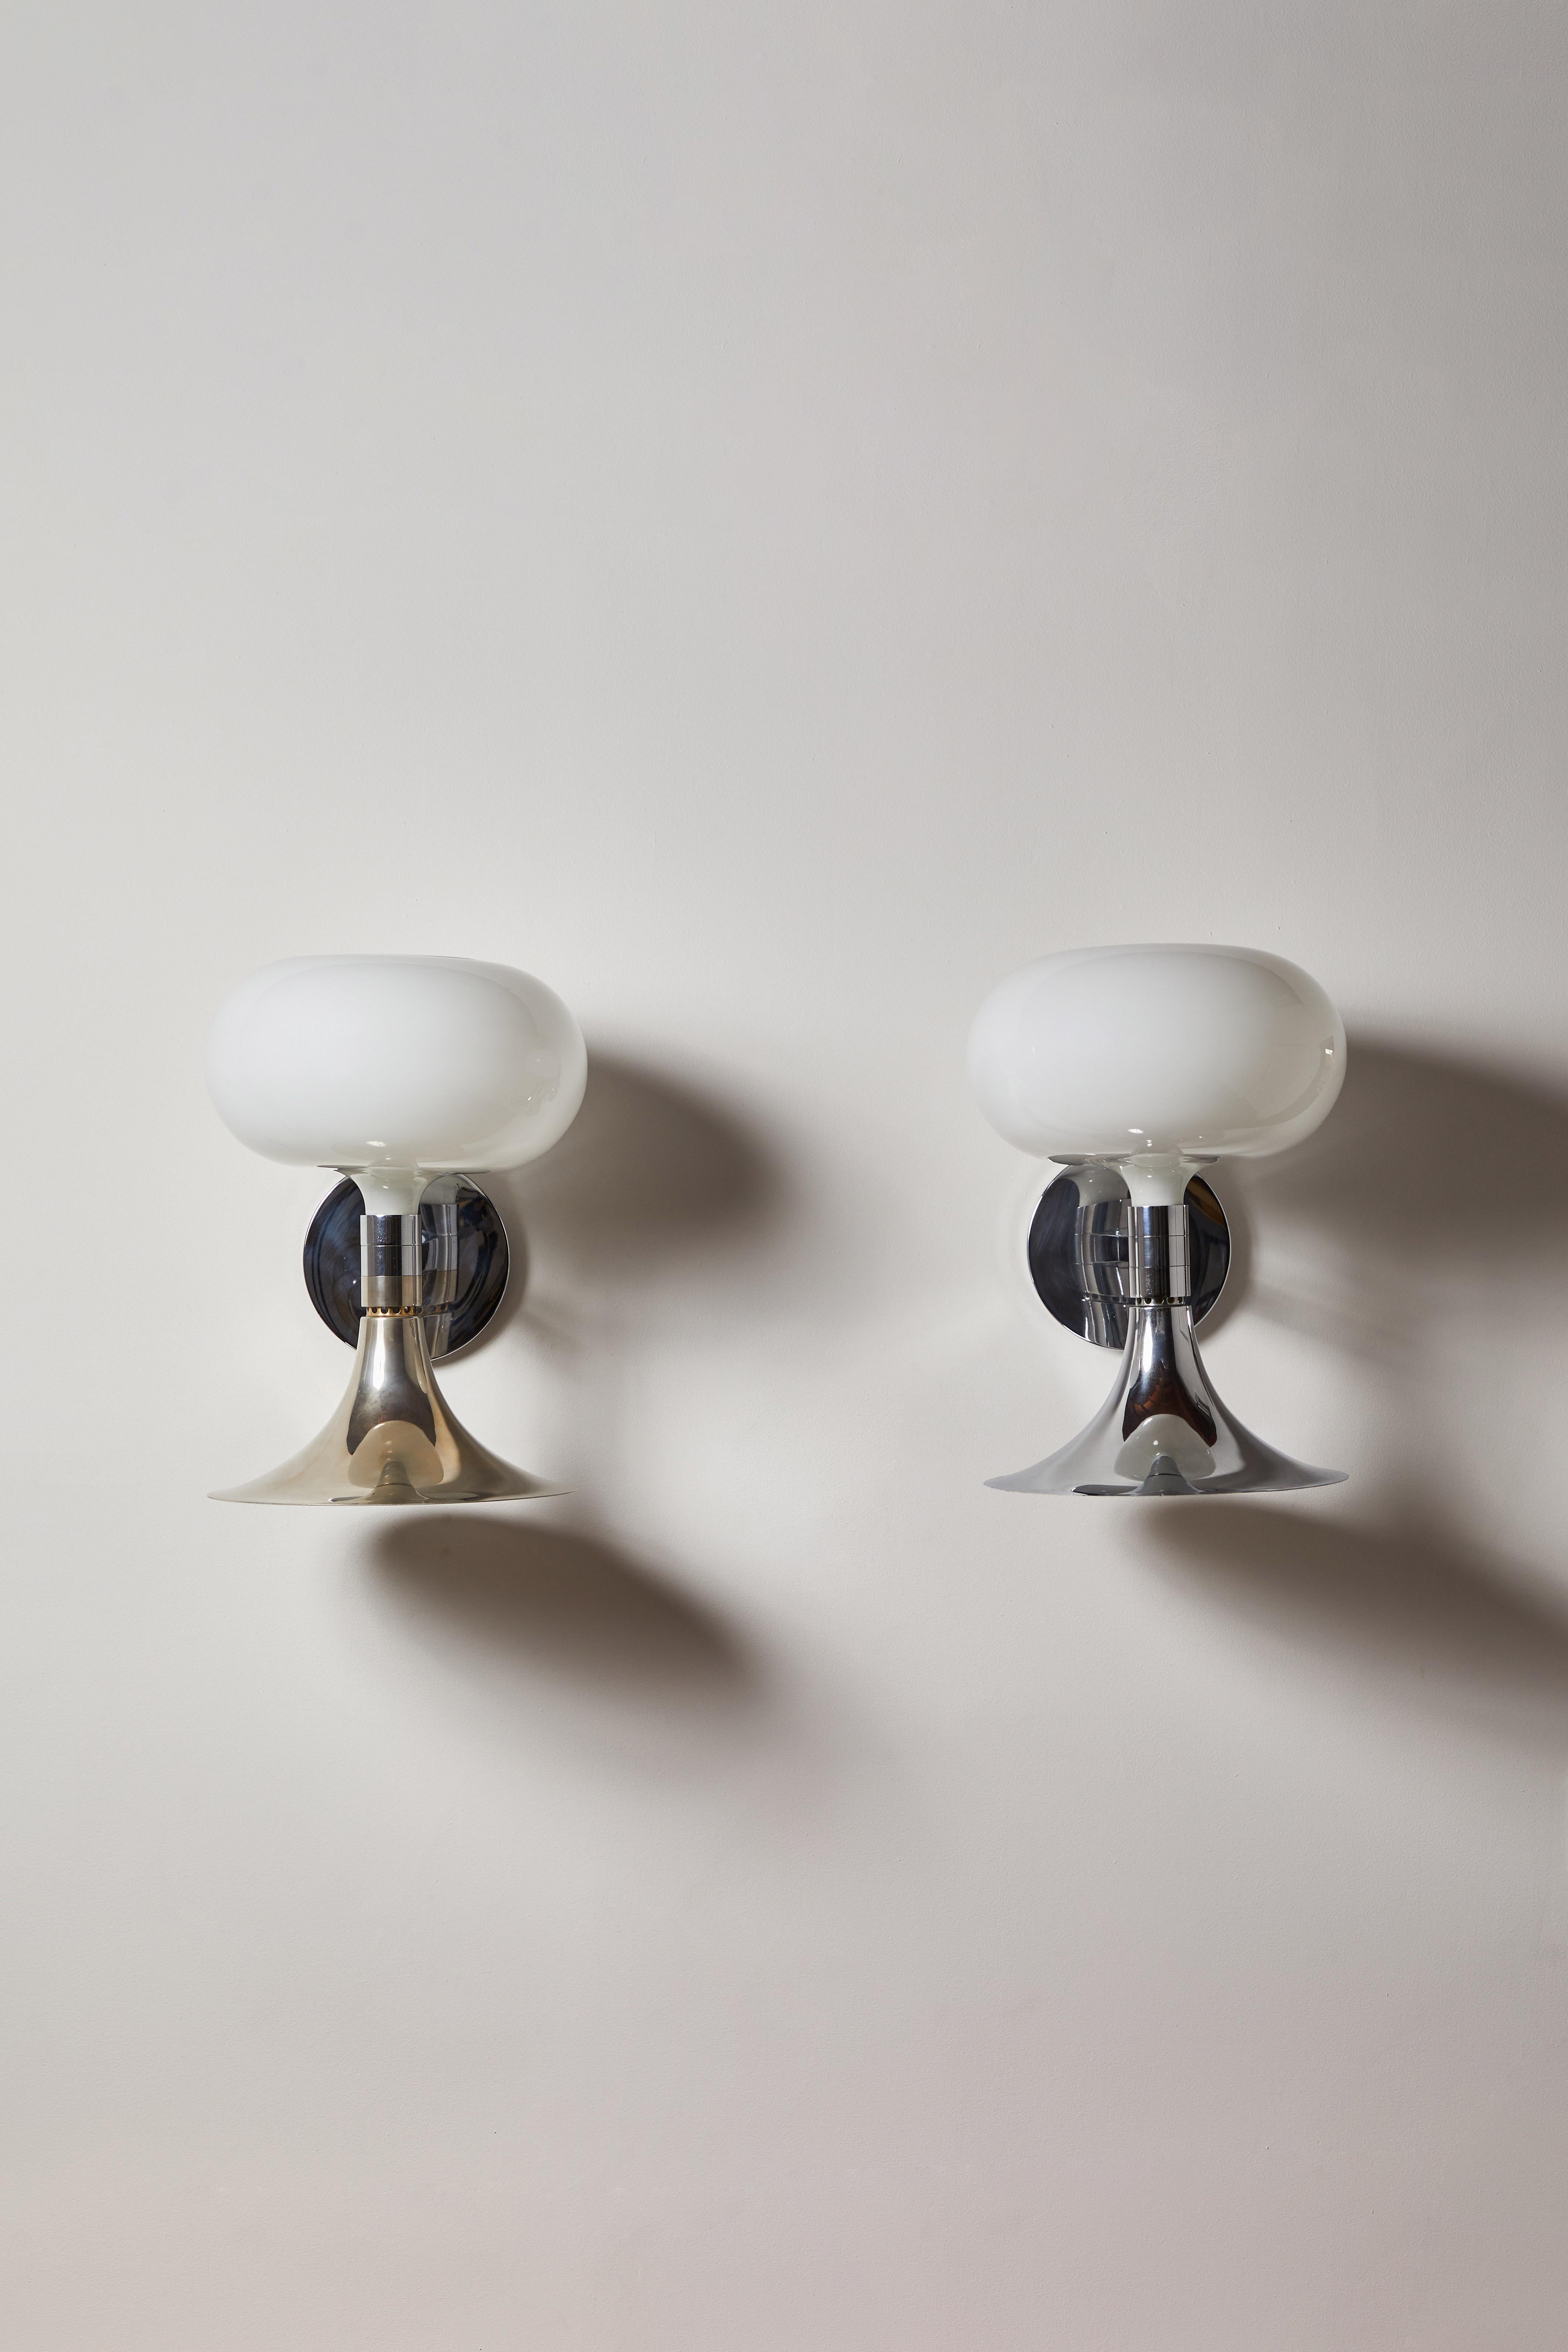 Pair of Wall Lights by Franco Albini, Franca Helg and Antonio Piva for Sirrah In Good Condition For Sale In Los Angeles, CA